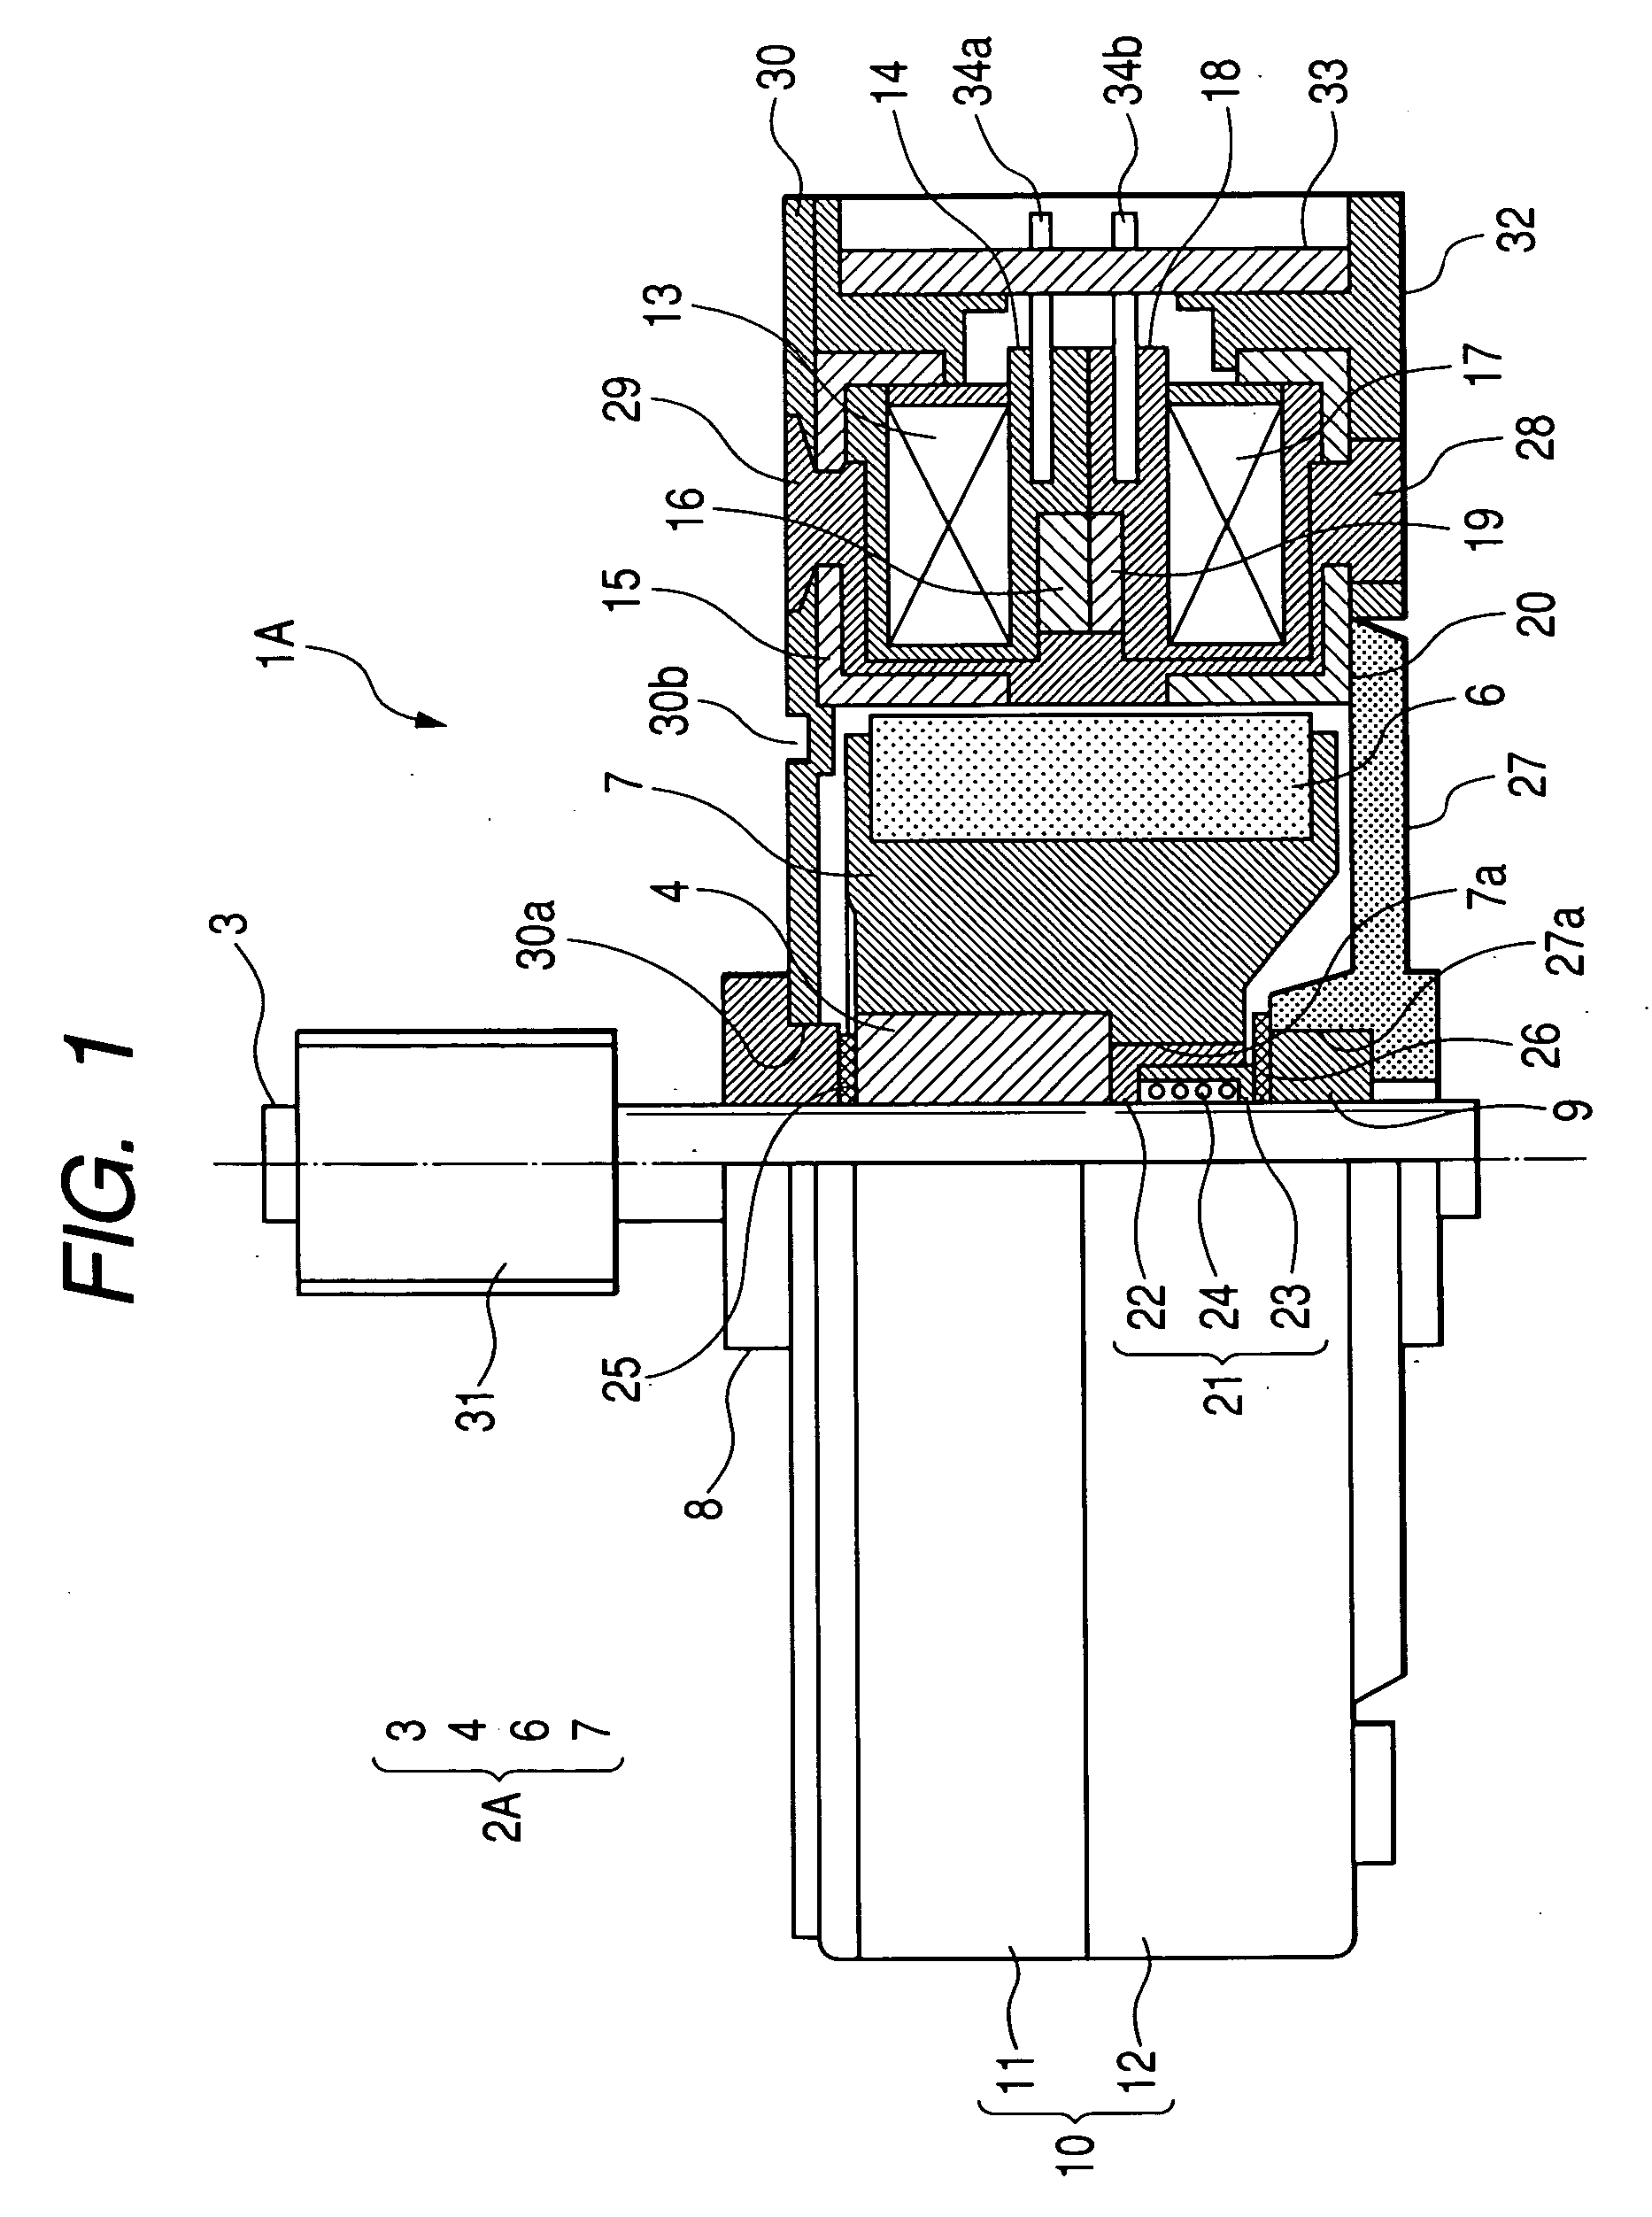 Stepping motor for use in high-temperature environments